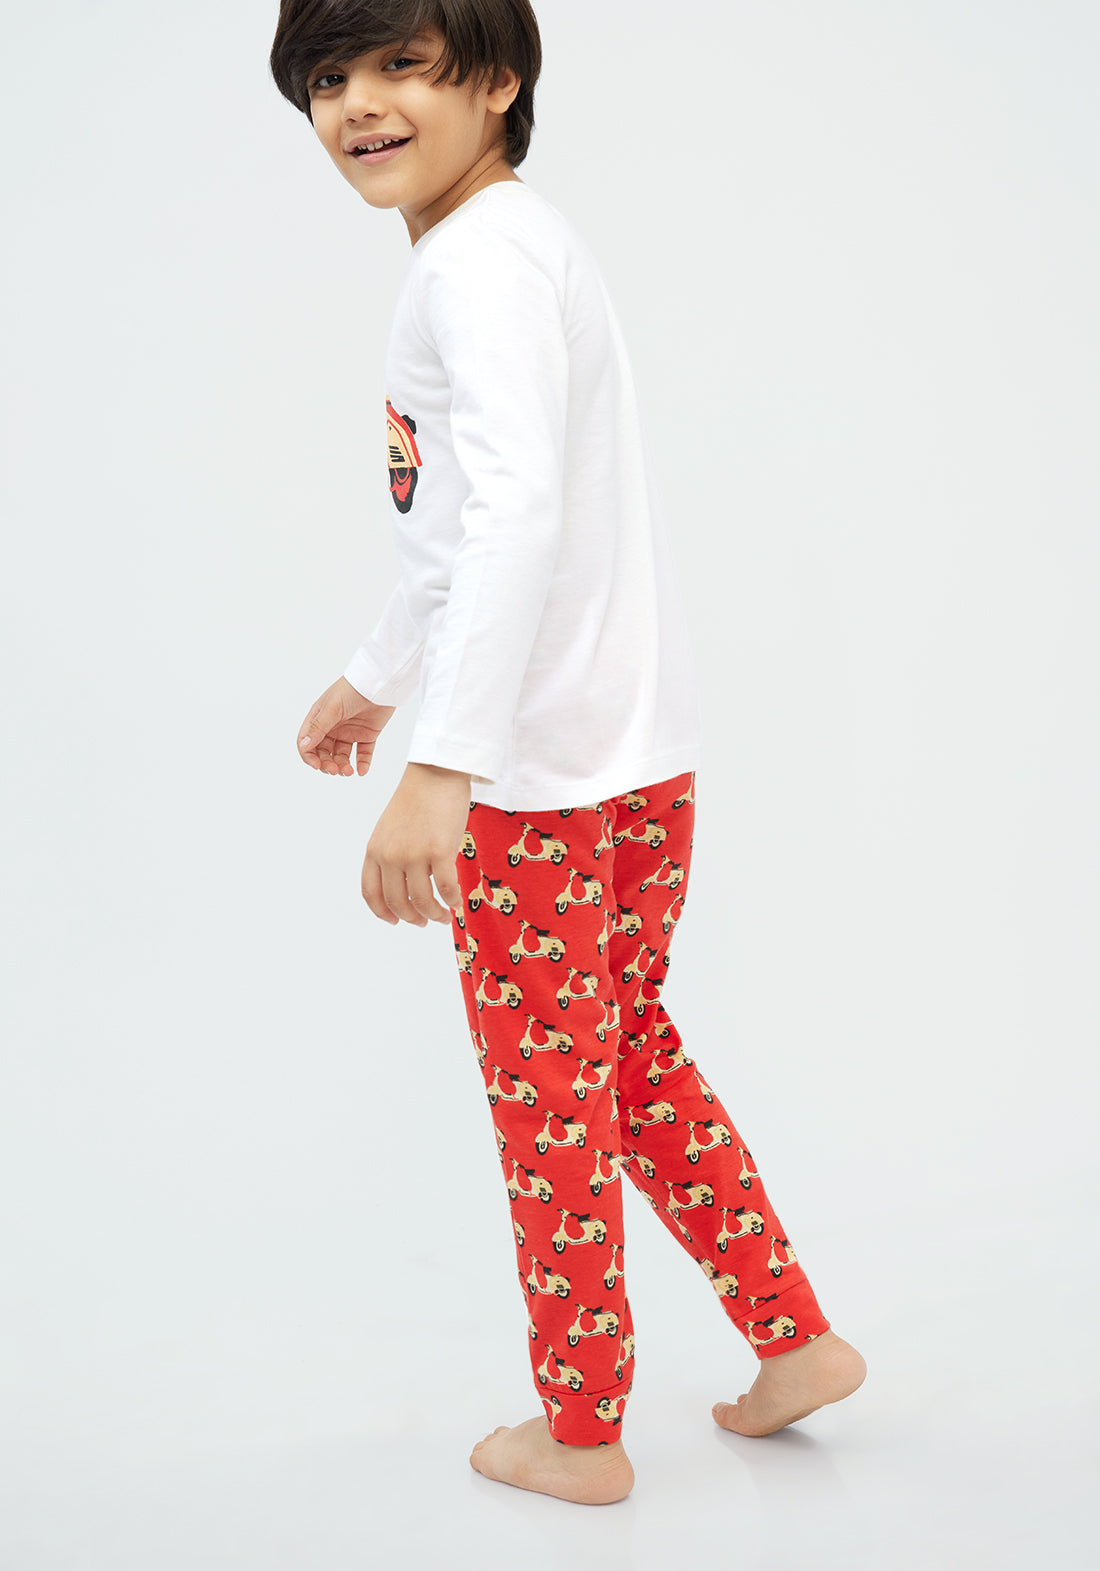 RED, BLACK AND YELLOW SCOOTER PRINT Long sleeve tee plus pant in knit